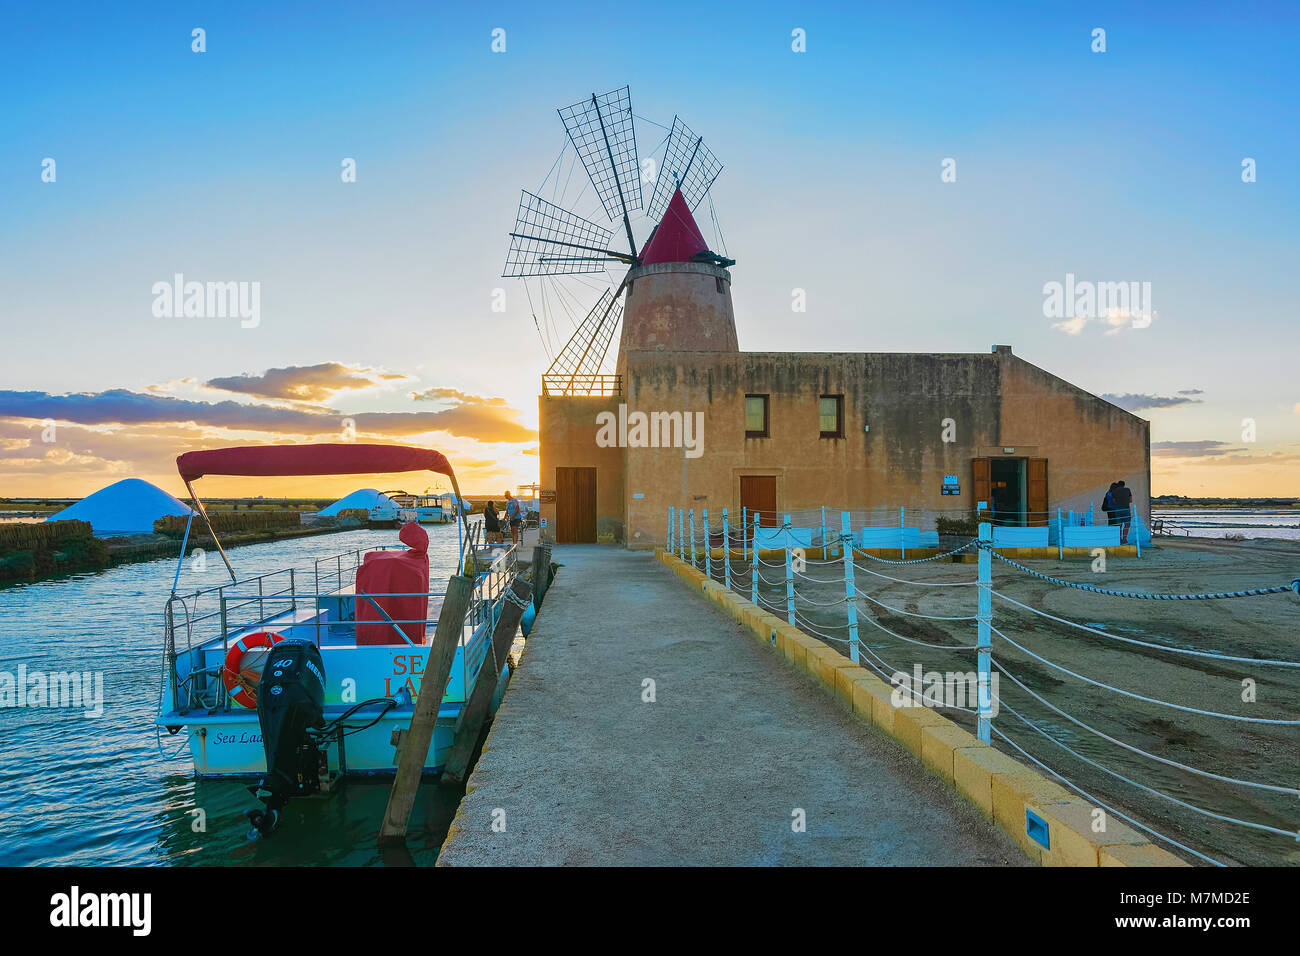 Marsala, Italy - September 19, 2017: Sunset at Windmill and the salt evoporation pond in Marsala, Sicily island in Italy Stock Photo